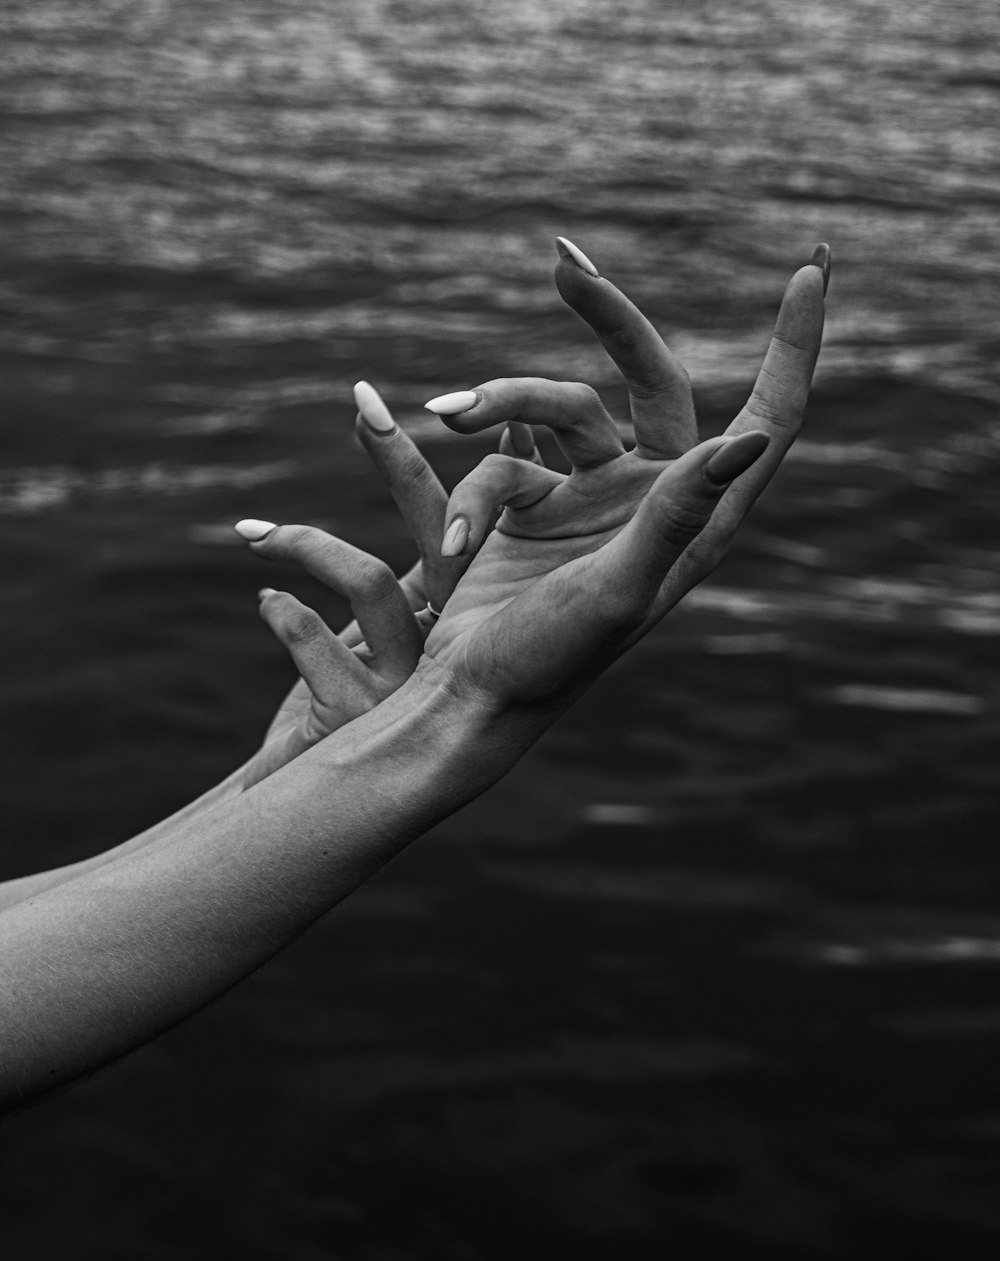 a black and white photo of two hands reaching towards each other